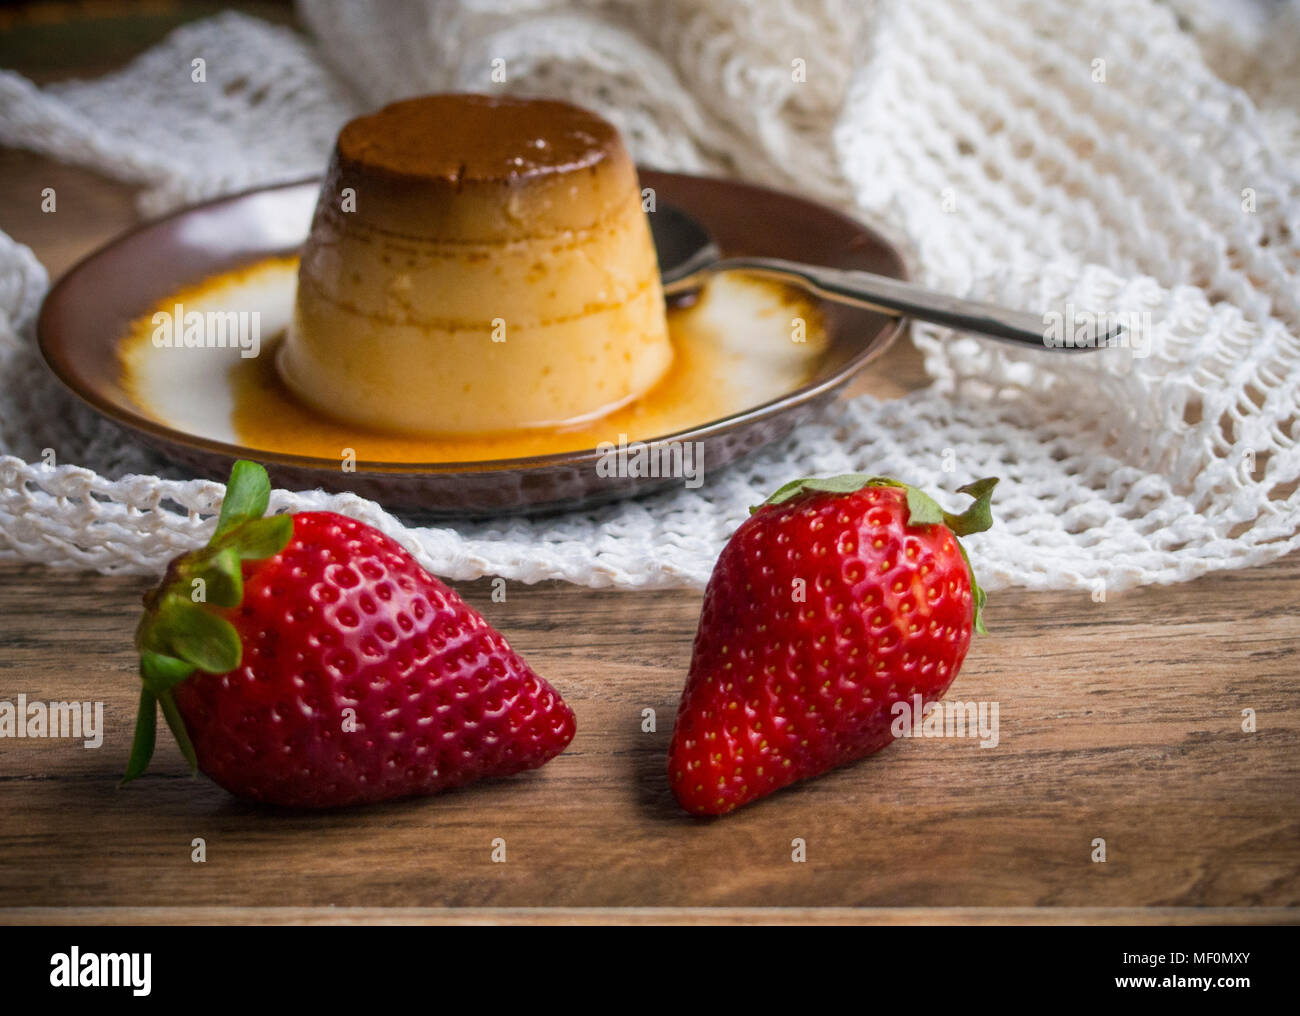 Flan in a plate on wood background Stock Photo